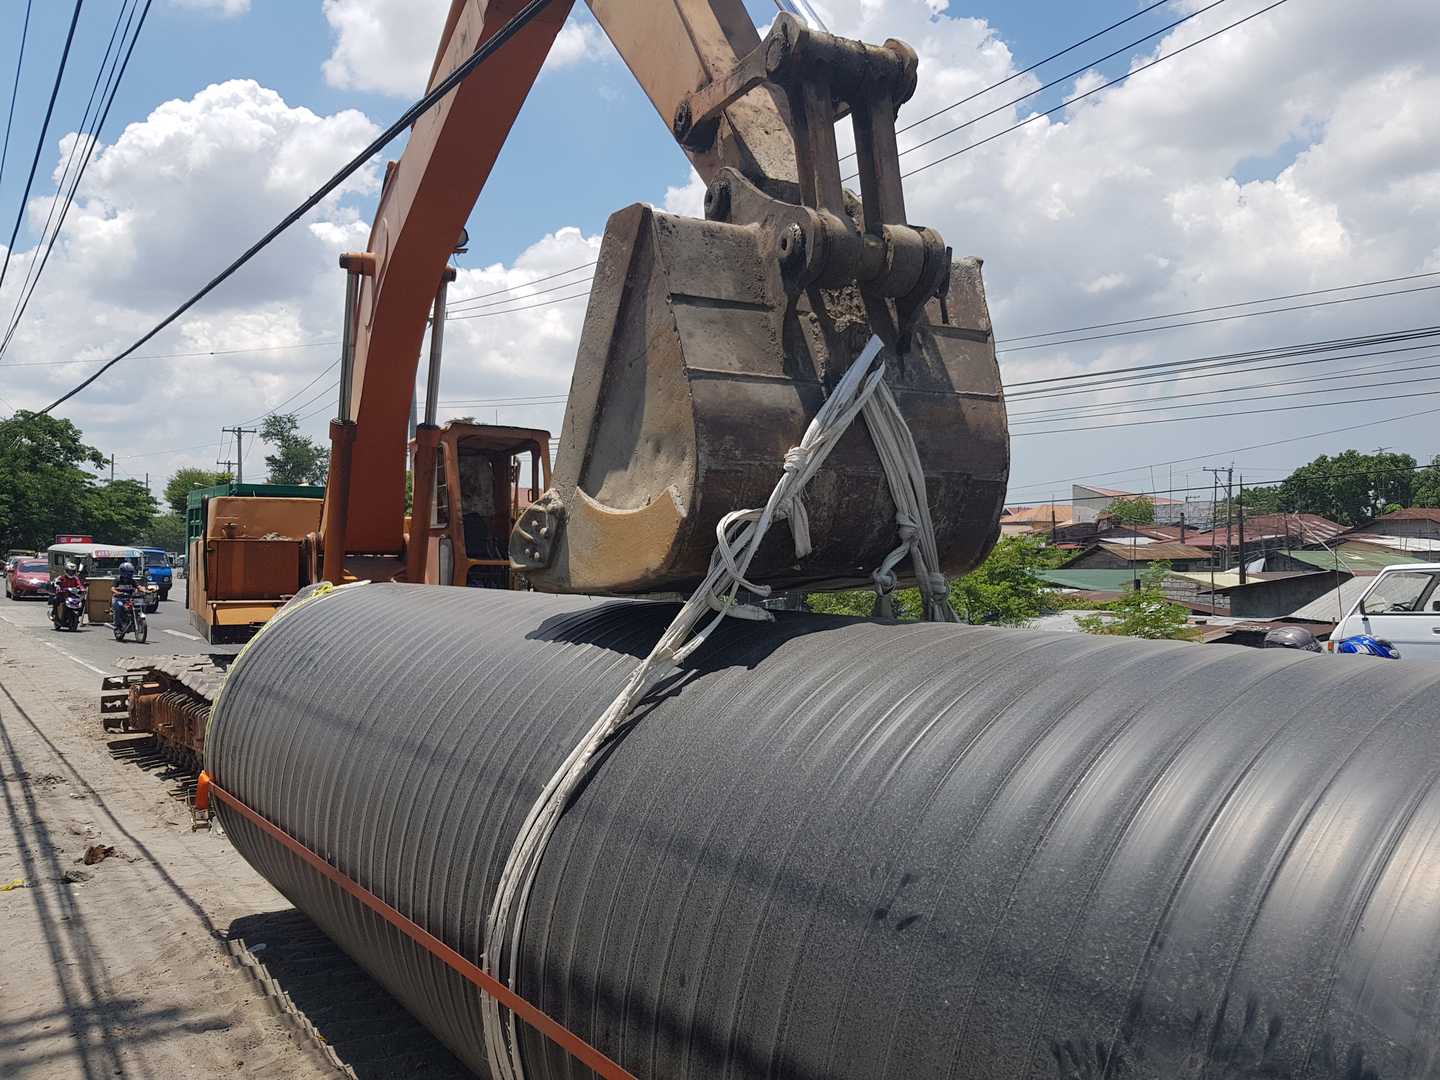 Lifting Krah pipes with an excavator